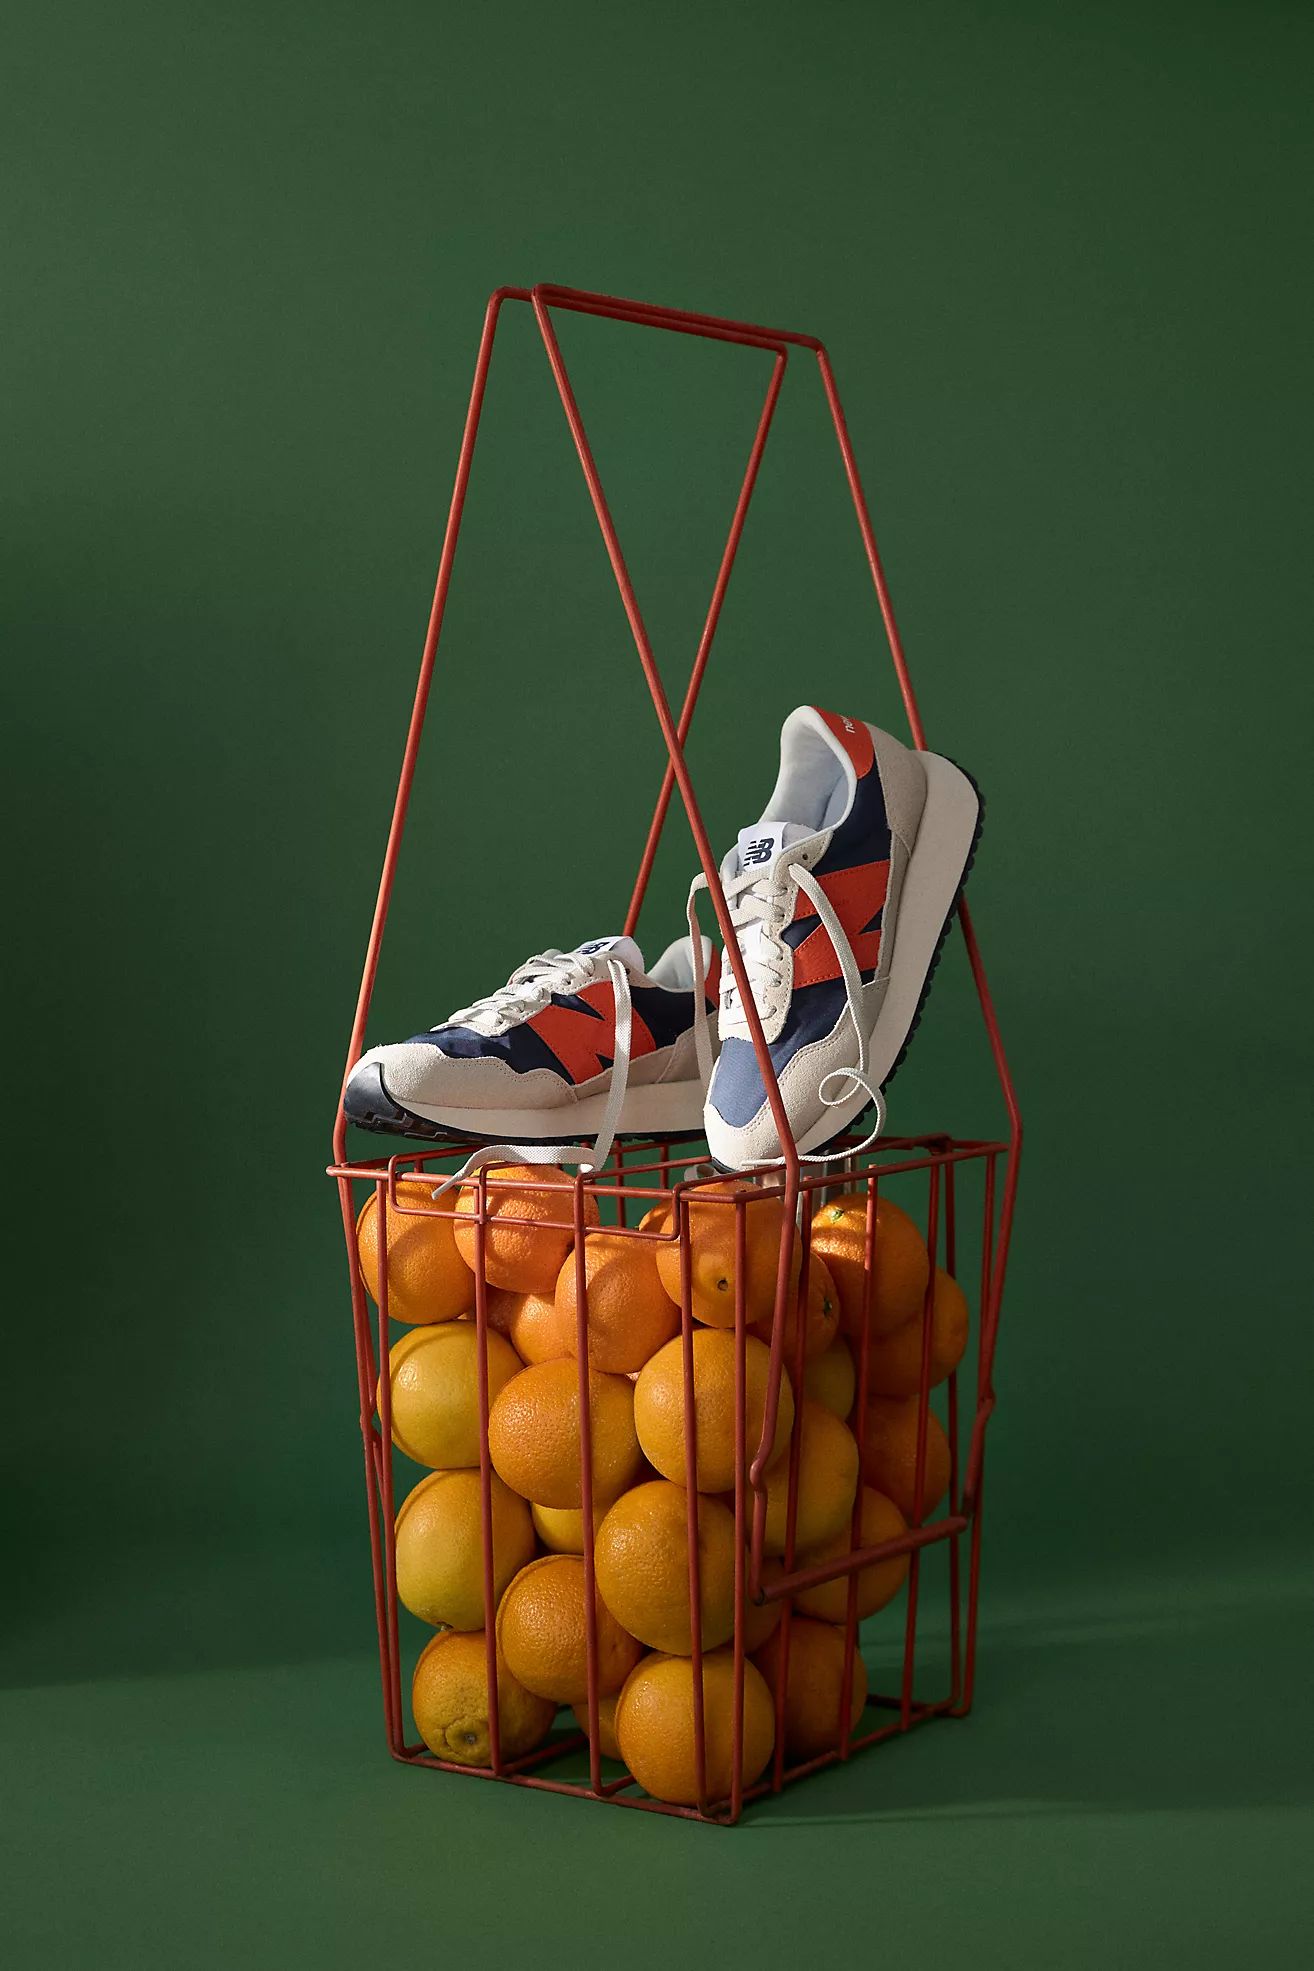 New Balance 237 Sneakers | Anthropologie (US)